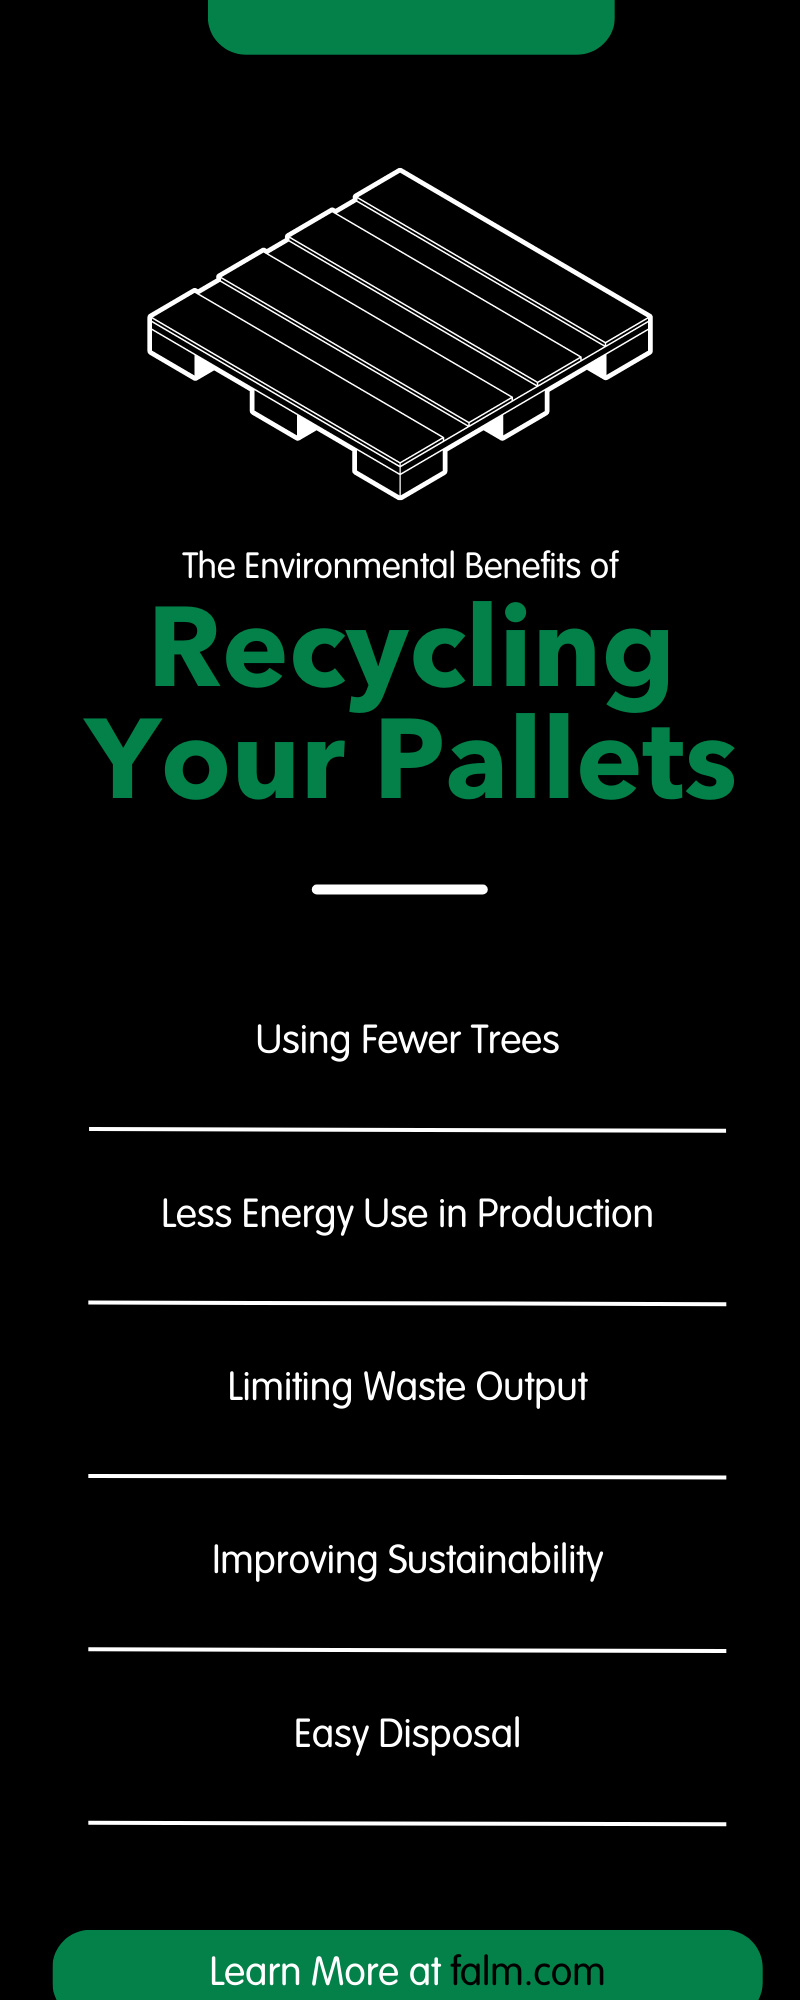 The Environmental Benefits of Recycling Your Pallets
